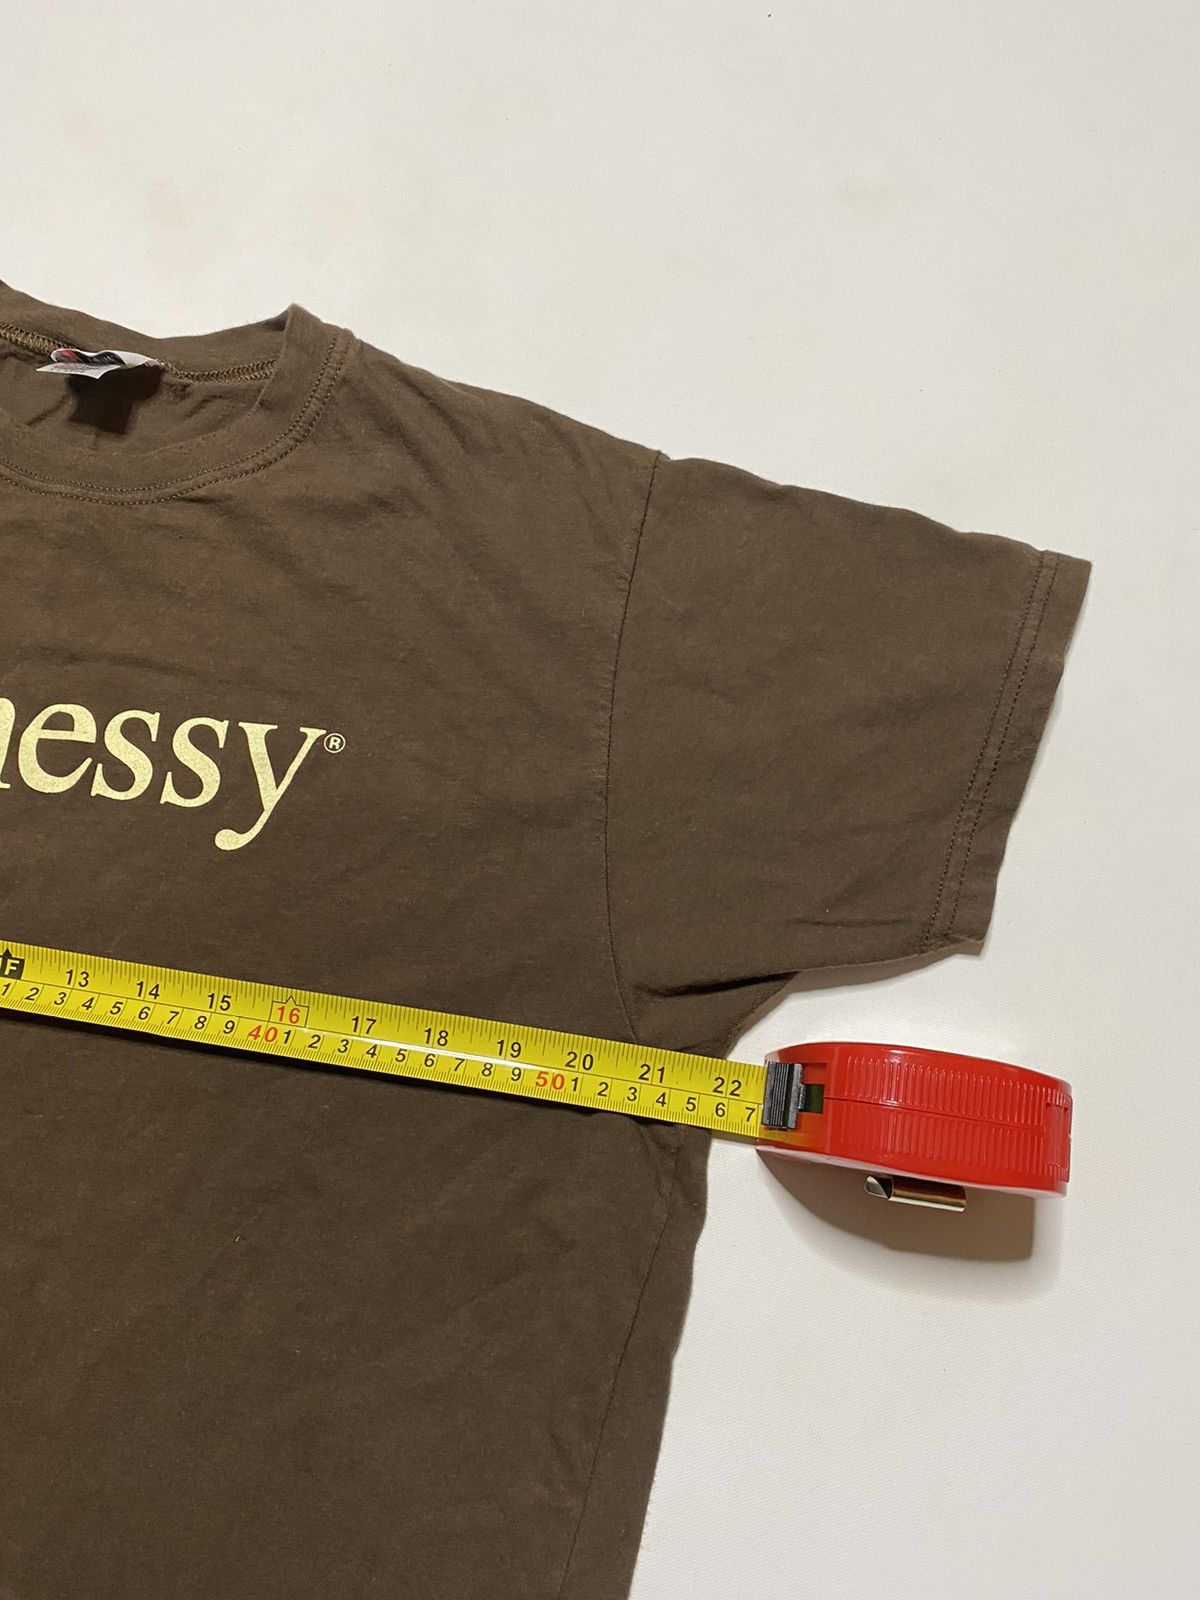 Hennessy Vintage Hennessy Cognac T Shirt Size XL Made IN USA Size US XL / EU 56 / 4 - 8 Thumbnail